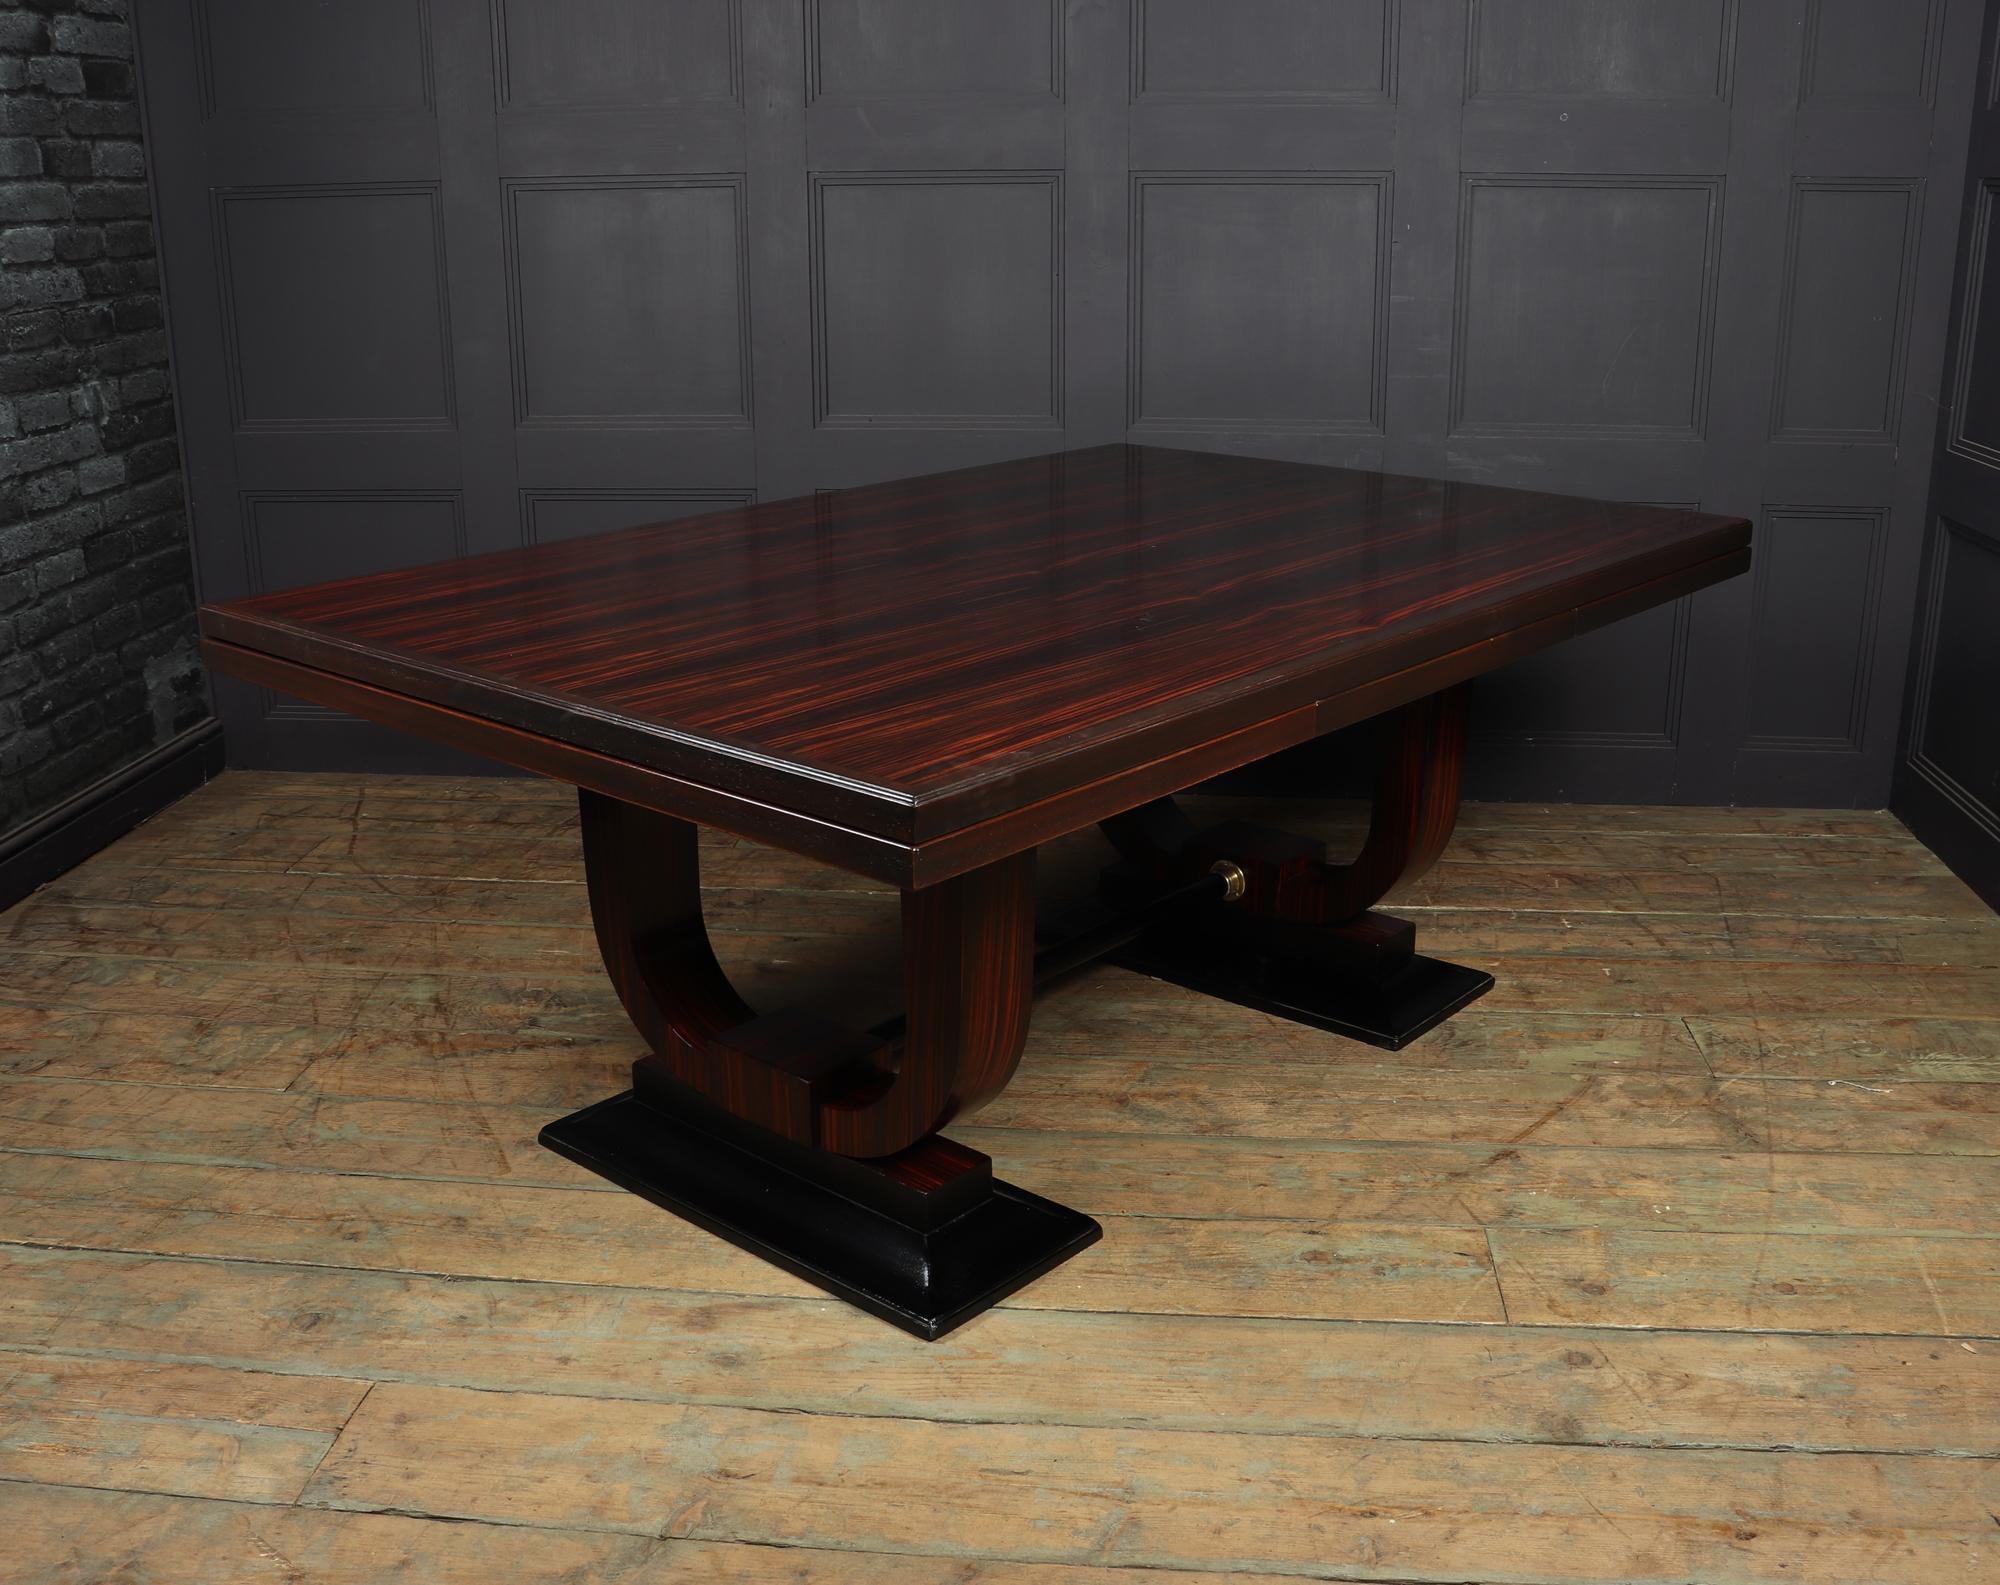 French Art Deco Dining Table in Macassar Ebony, c1925